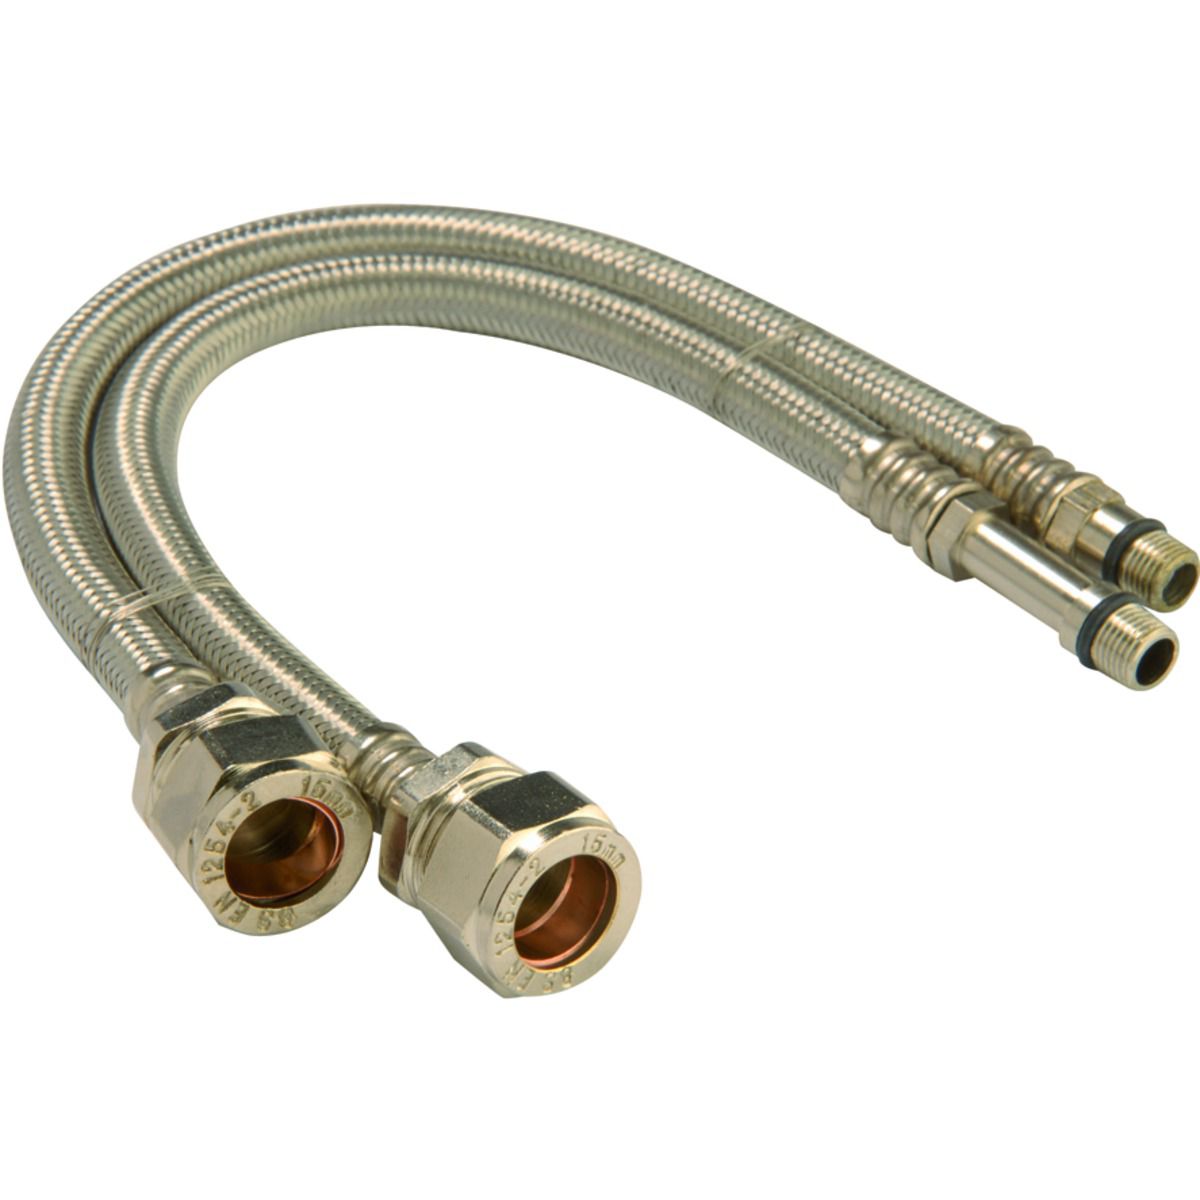 Image of Primaflow Flexible Monobloc Tap Connector - 15 X 10 X 300mm Pack Of 2